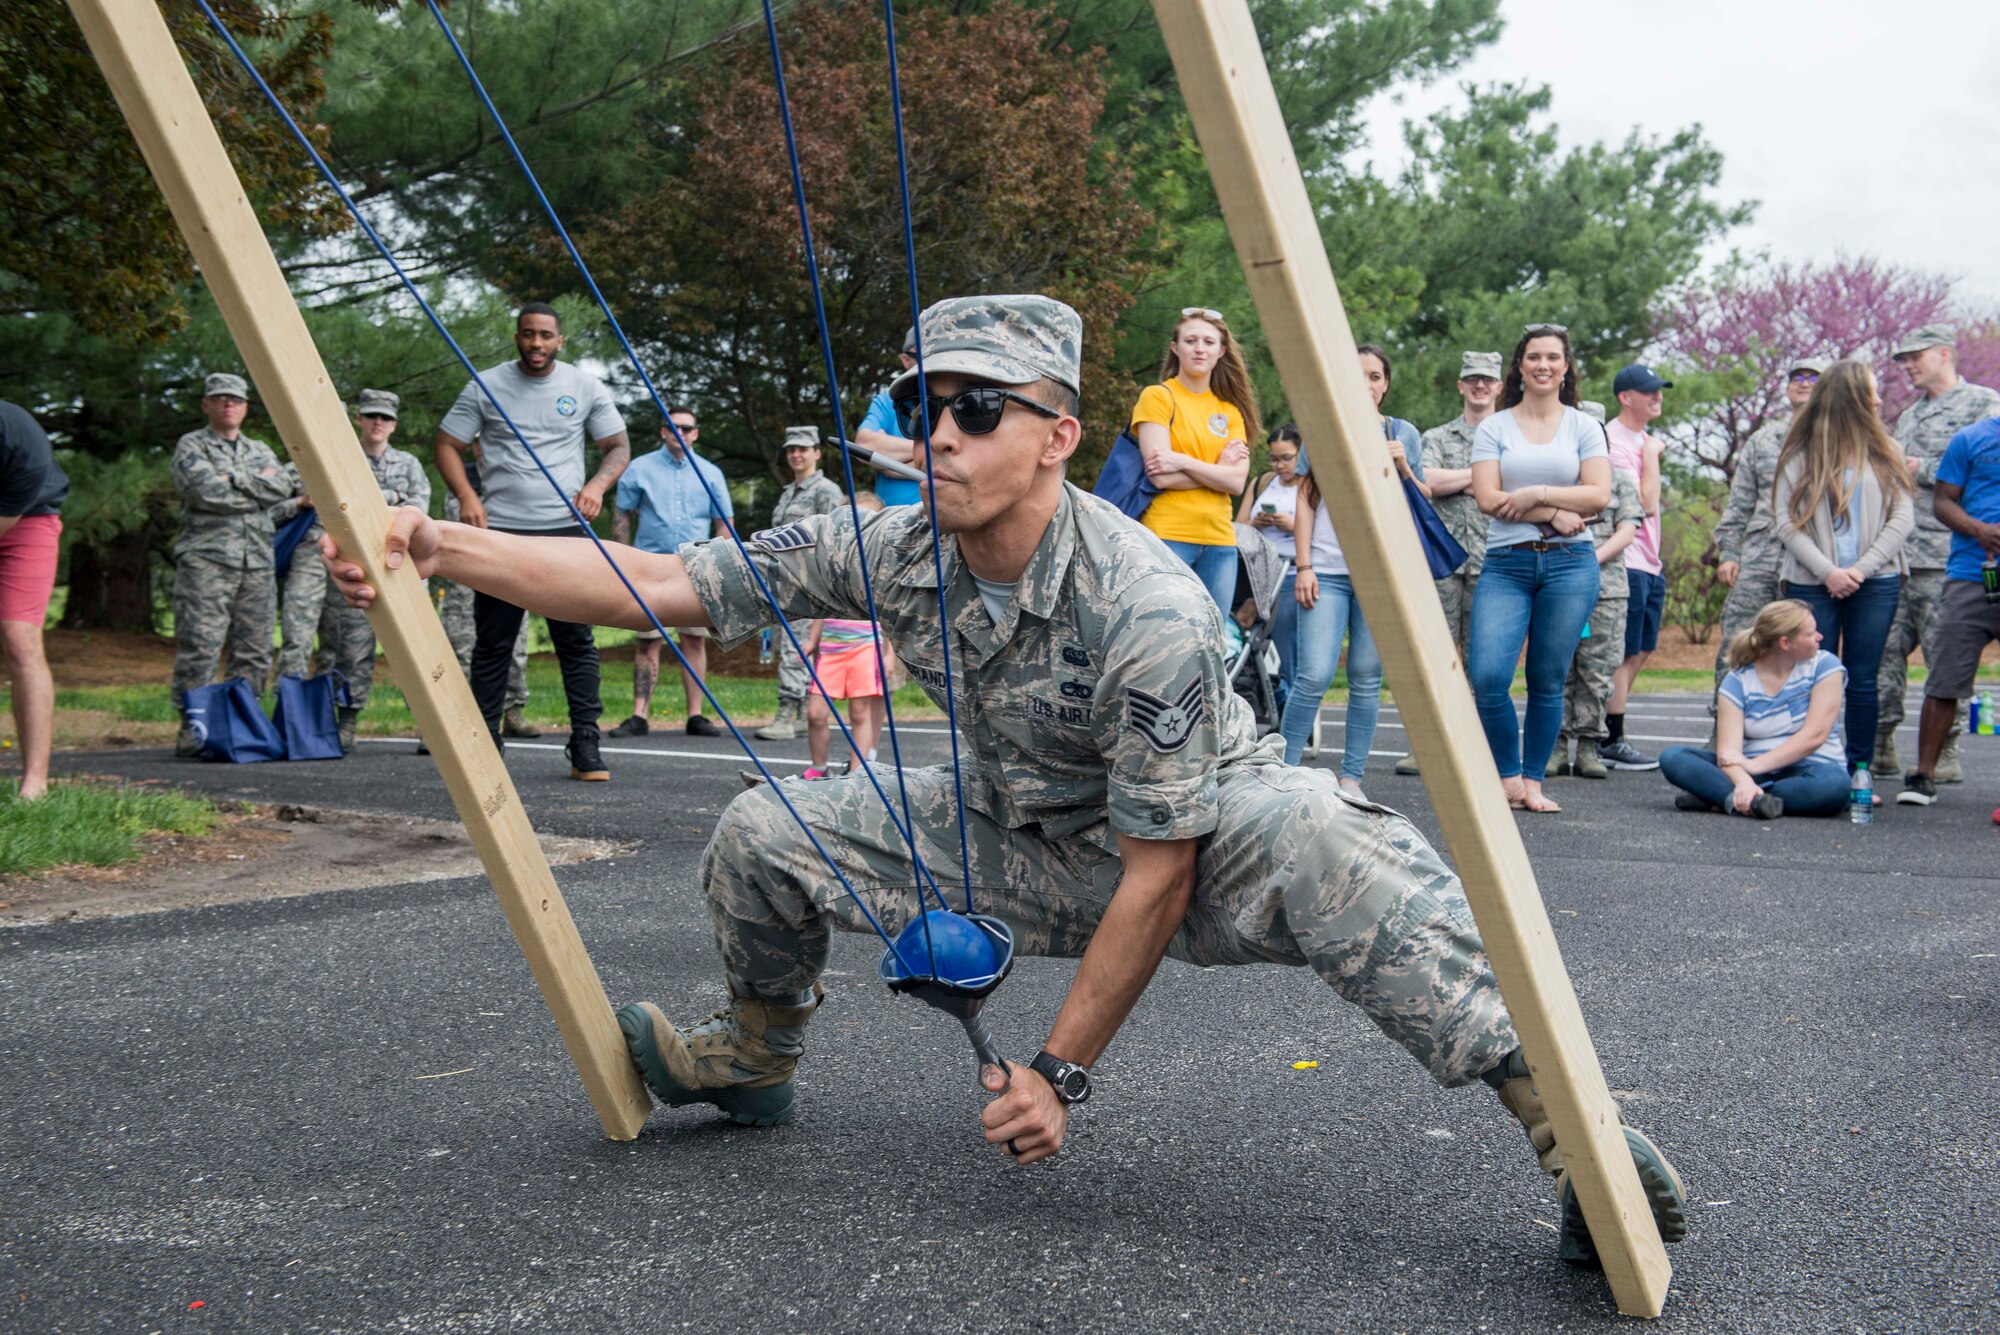 Staff Sgt. Joseph Logrande, 561st Network Operations Squadron Detachment 3, pulls back a water balloon sling shot at Scott Air Force Base’s annual Spring Fling and Diversity Day event, May 4, 2018. The event featured a squadron water balloon slingshot contest, where teams built their own slingshot and shot at targets to earn points. (U.S. Air Force photo by Airman 1st Class Chad Gorecki)